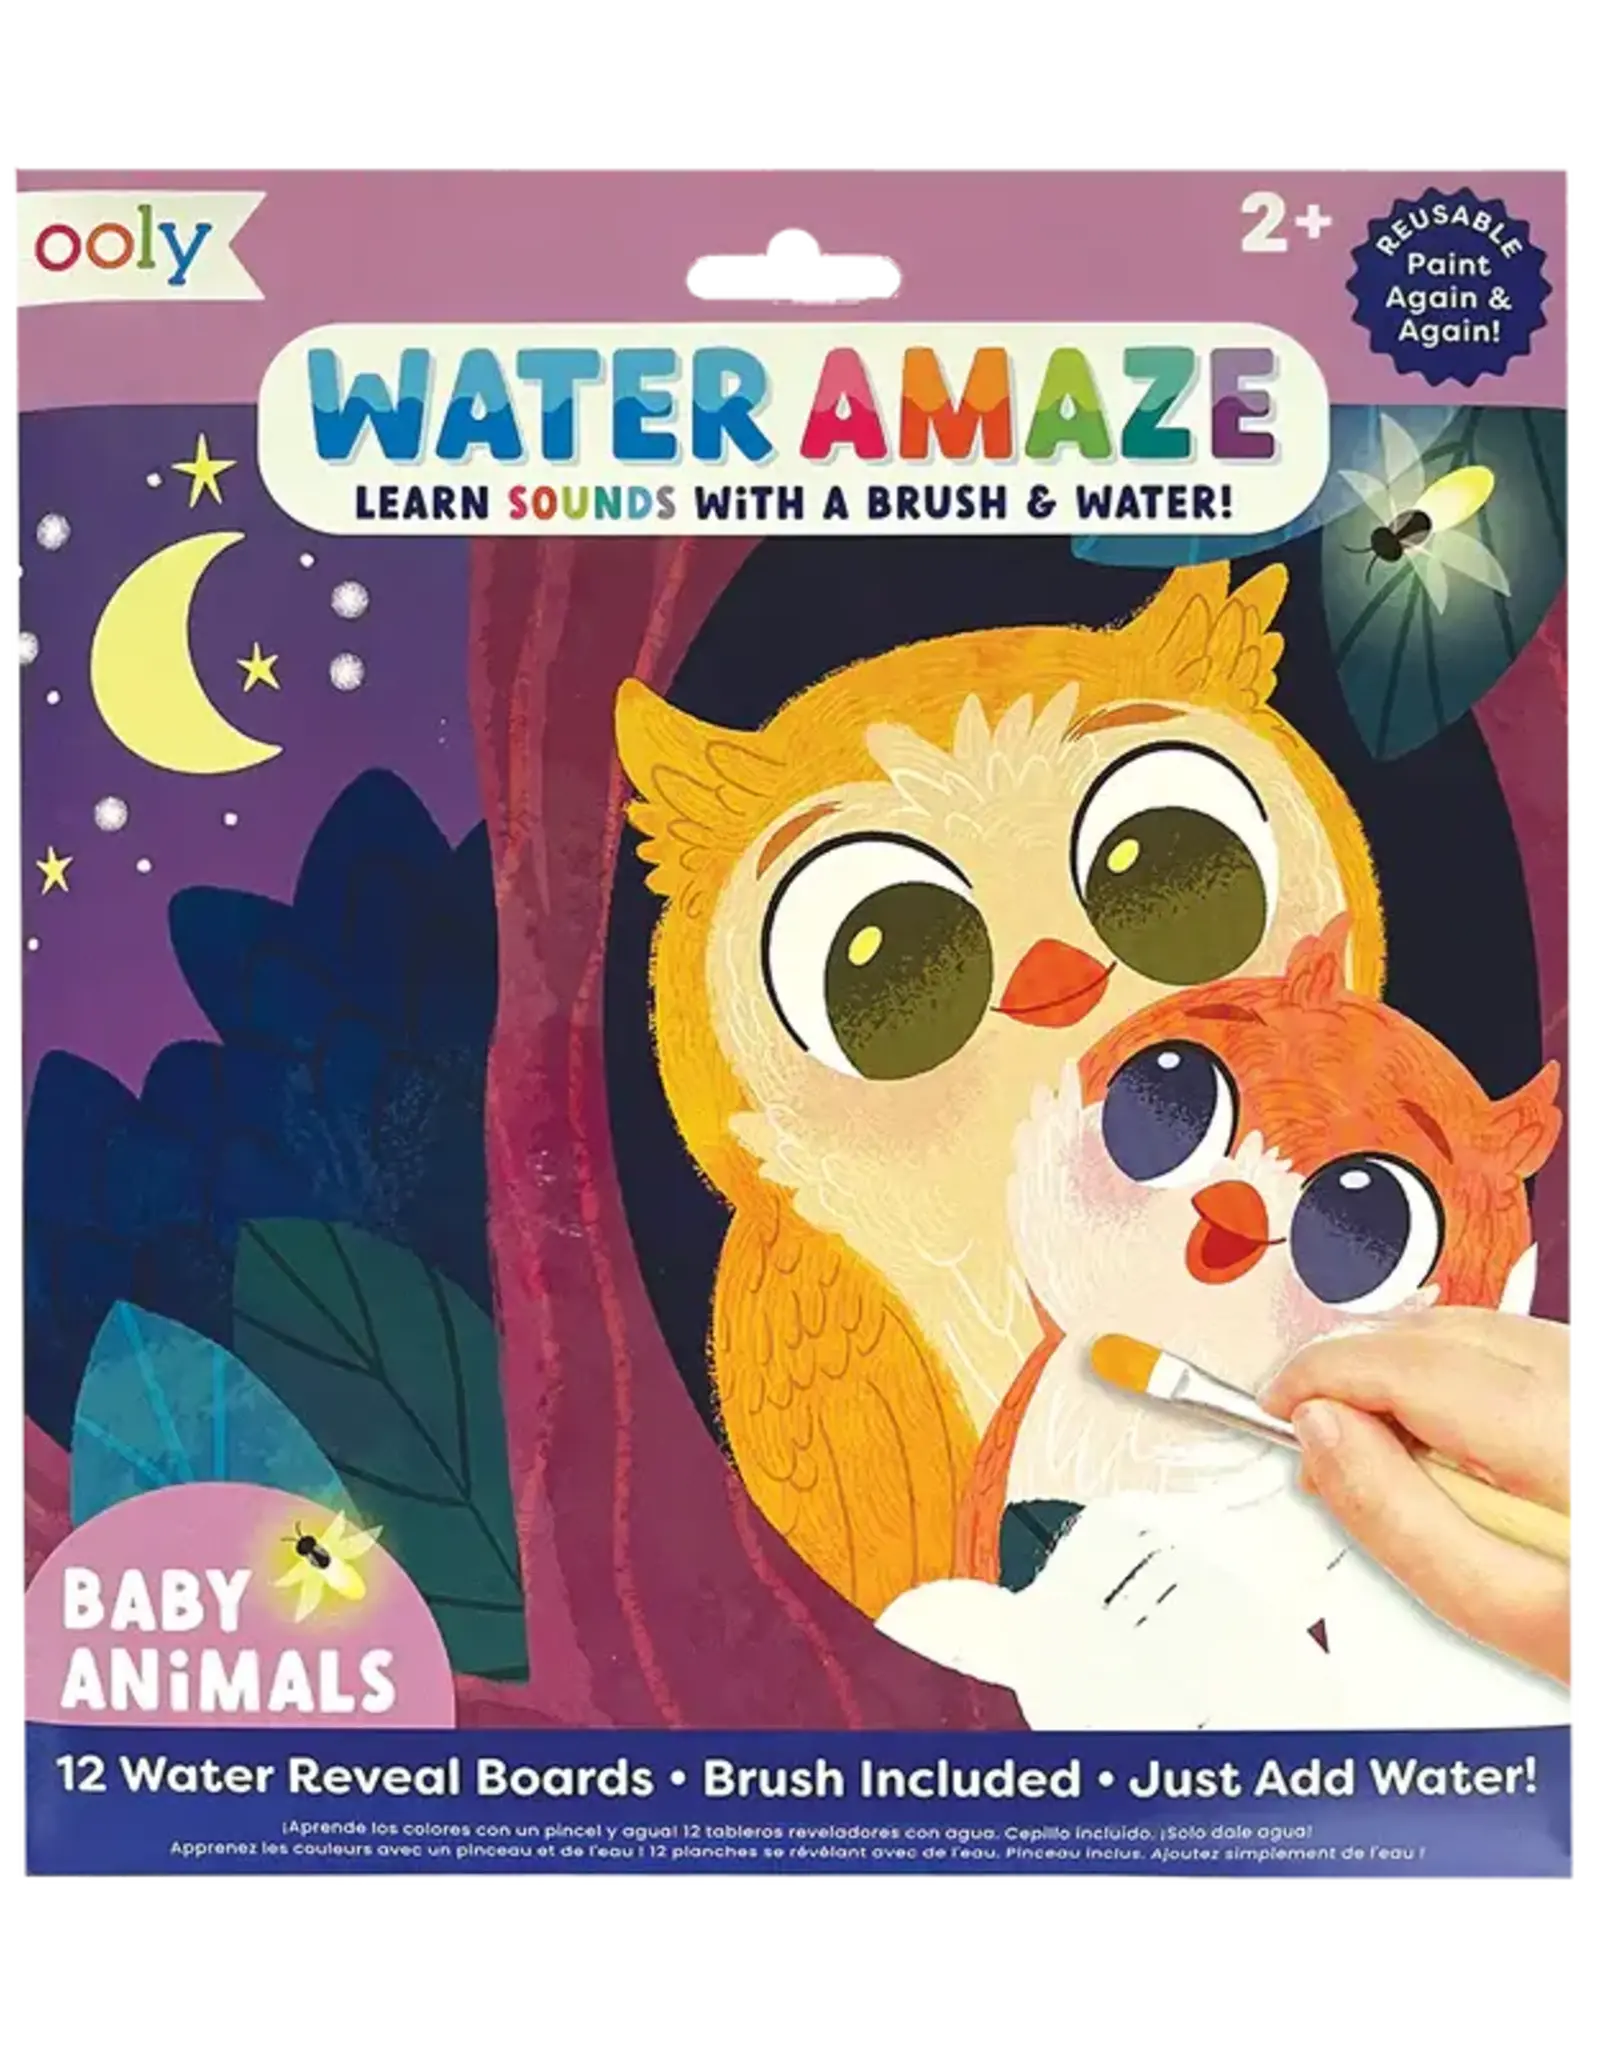 OOLY WATER AMAZE WATER REVEAL BOARDS - BABY ANIMALS